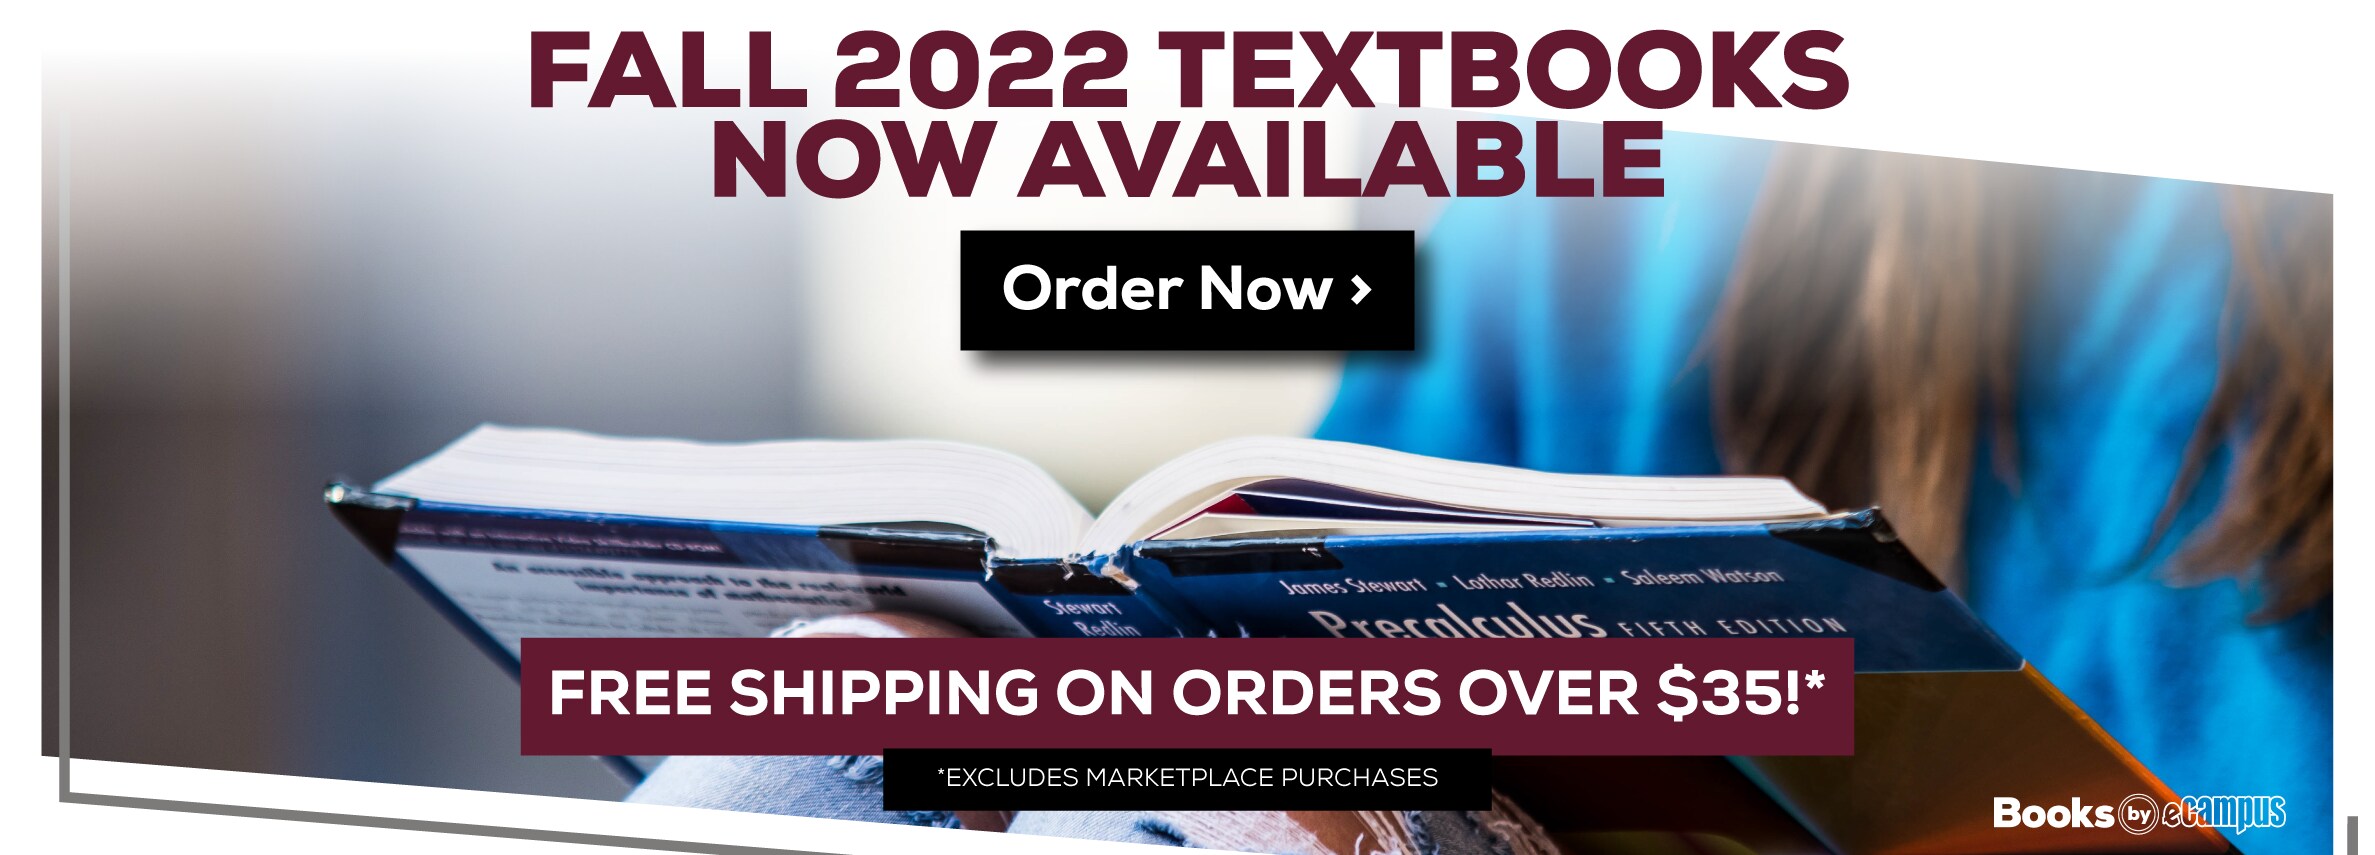 Fall 2022 Textbooks Now Available. Free shipping on orders over $35! Excludes marketplace purchases. Order Now.